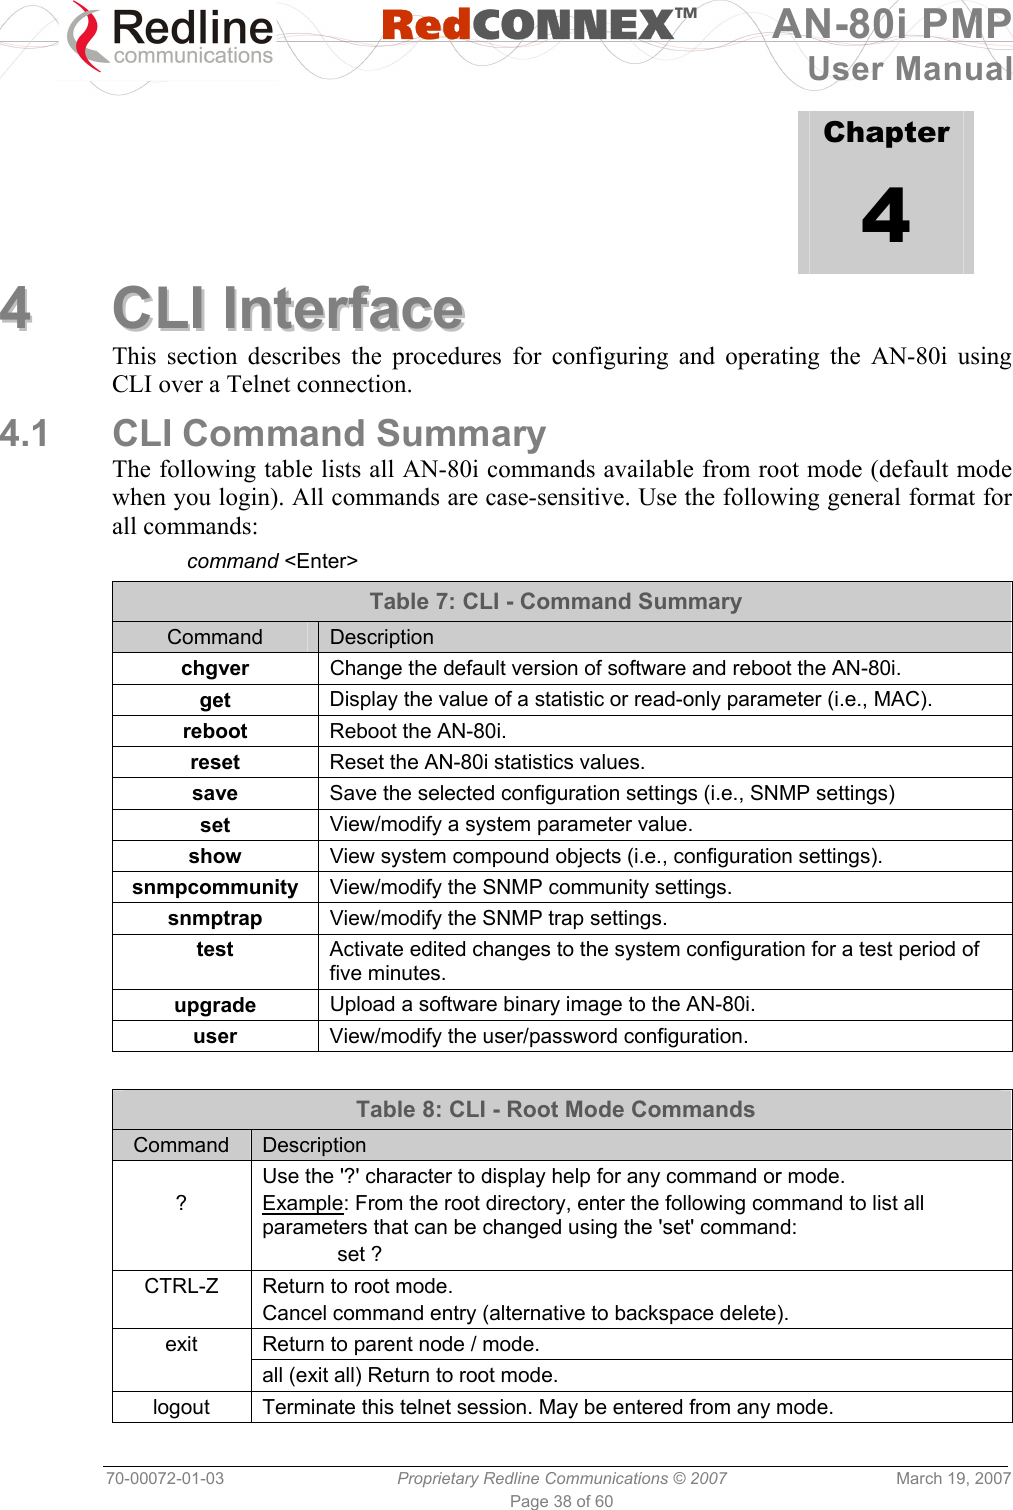   RedCONNEXTM AN-80i PMP User Manual 70-00072-01-03  Proprietary Redline Communications © 2007  March 19, 2007 Page 38 of 60              Chapter 4 44  CCLLII  IInntteerrffaaccee  This section describes the procedures for configuring and operating the AN-80i using CLI over a Telnet connection. 4.1  CLI Command Summary The following table lists all AN-80i commands available from root mode (default mode when you login). All commands are case-sensitive. Use the following general format for all commands:  command &lt;Enter&gt; Table 7: CLI - Command Summary Command  Description chgver  Change the default version of software and reboot the AN-80i. get  Display the value of a statistic or read-only parameter (i.e., MAC).  reboot  Reboot the AN-80i. reset  Reset the AN-80i statistics values. save  Save the selected configuration settings (i.e., SNMP settings) set  View/modify a system parameter value. show  View system compound objects (i.e., configuration settings). snmpcommunity  View/modify the SNMP community settings. snmptrap  View/modify the SNMP trap settings. test  Activate edited changes to the system configuration for a test period of five minutes. upgrade  Upload a software binary image to the AN-80i. user  View/modify the user/password configuration.  Table 8: CLI - Root Mode Commands Command  Description  ? Use the &apos;?&apos; character to display help for any command or mode. Example: From the root directory, enter the following command to list all parameters that can be changed using the &apos;set&apos; command:  set ? CTRL-Z  Return to root mode. Cancel command entry (alternative to backspace delete). Return to parent node / mode. exit  all (exit all) Return to root mode. logout  Terminate this telnet session. May be entered from any mode. 